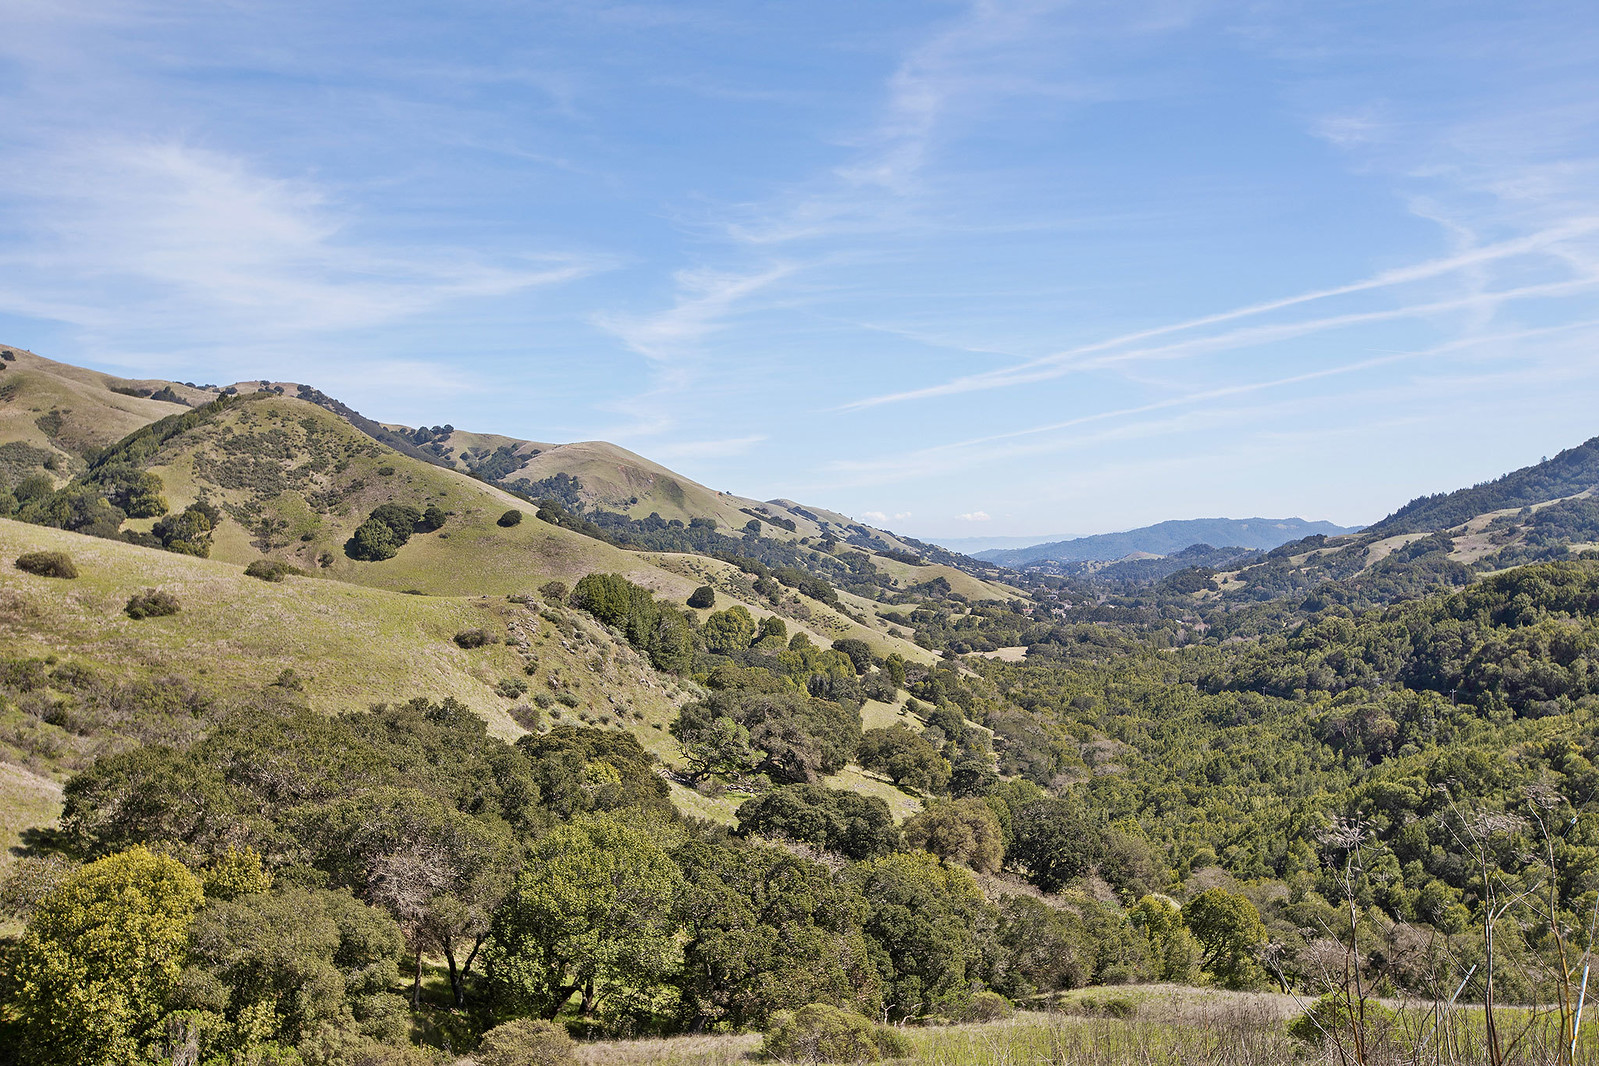 Cover Image for 5675 Lucas Valley Road presented by Sherry Ramzi